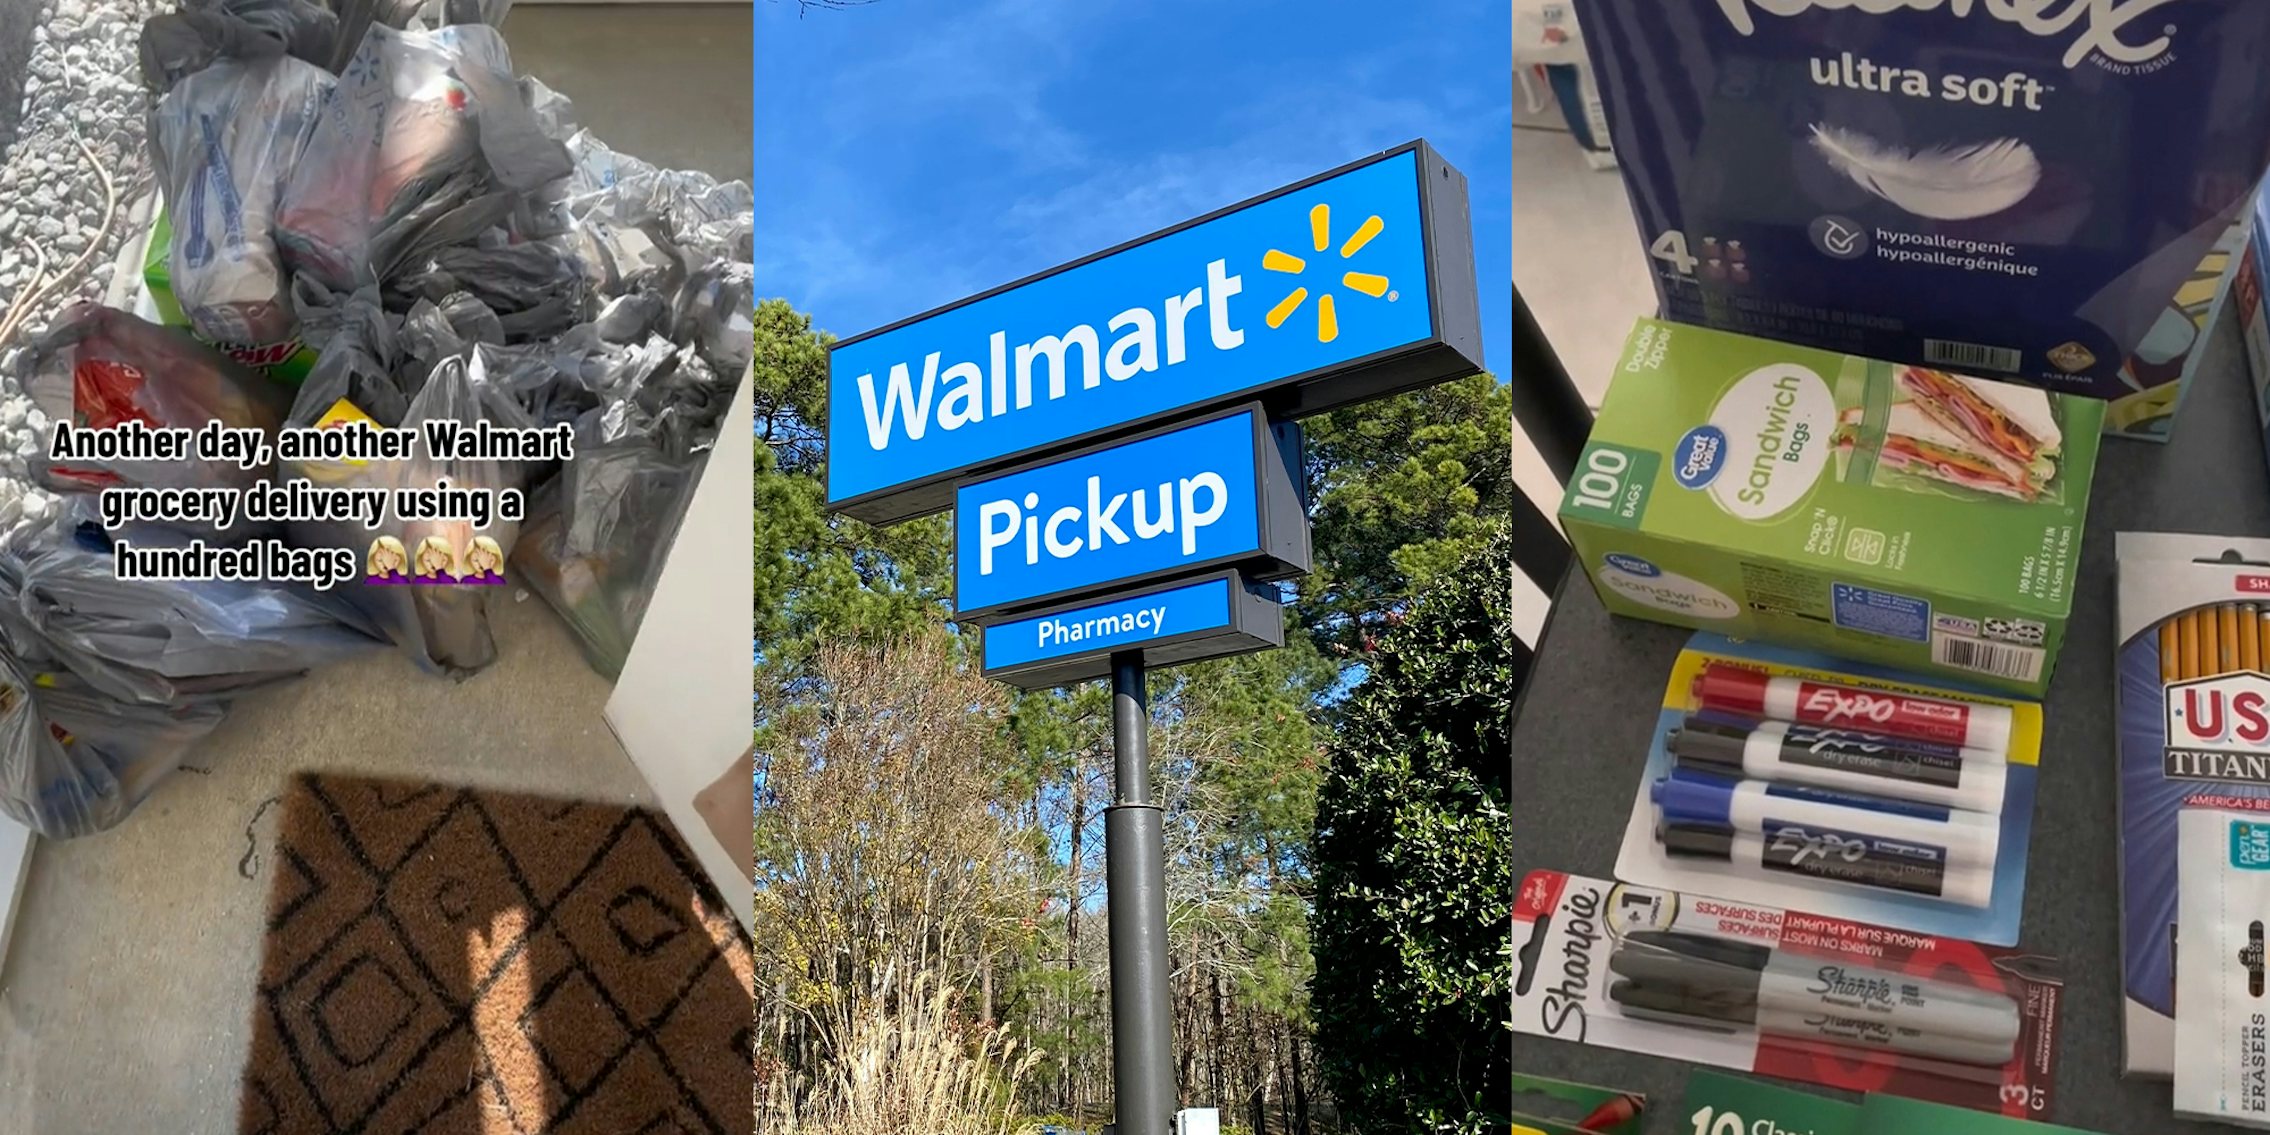 Walmart pick-up customer says every item was placed in individual bag for 45-item order